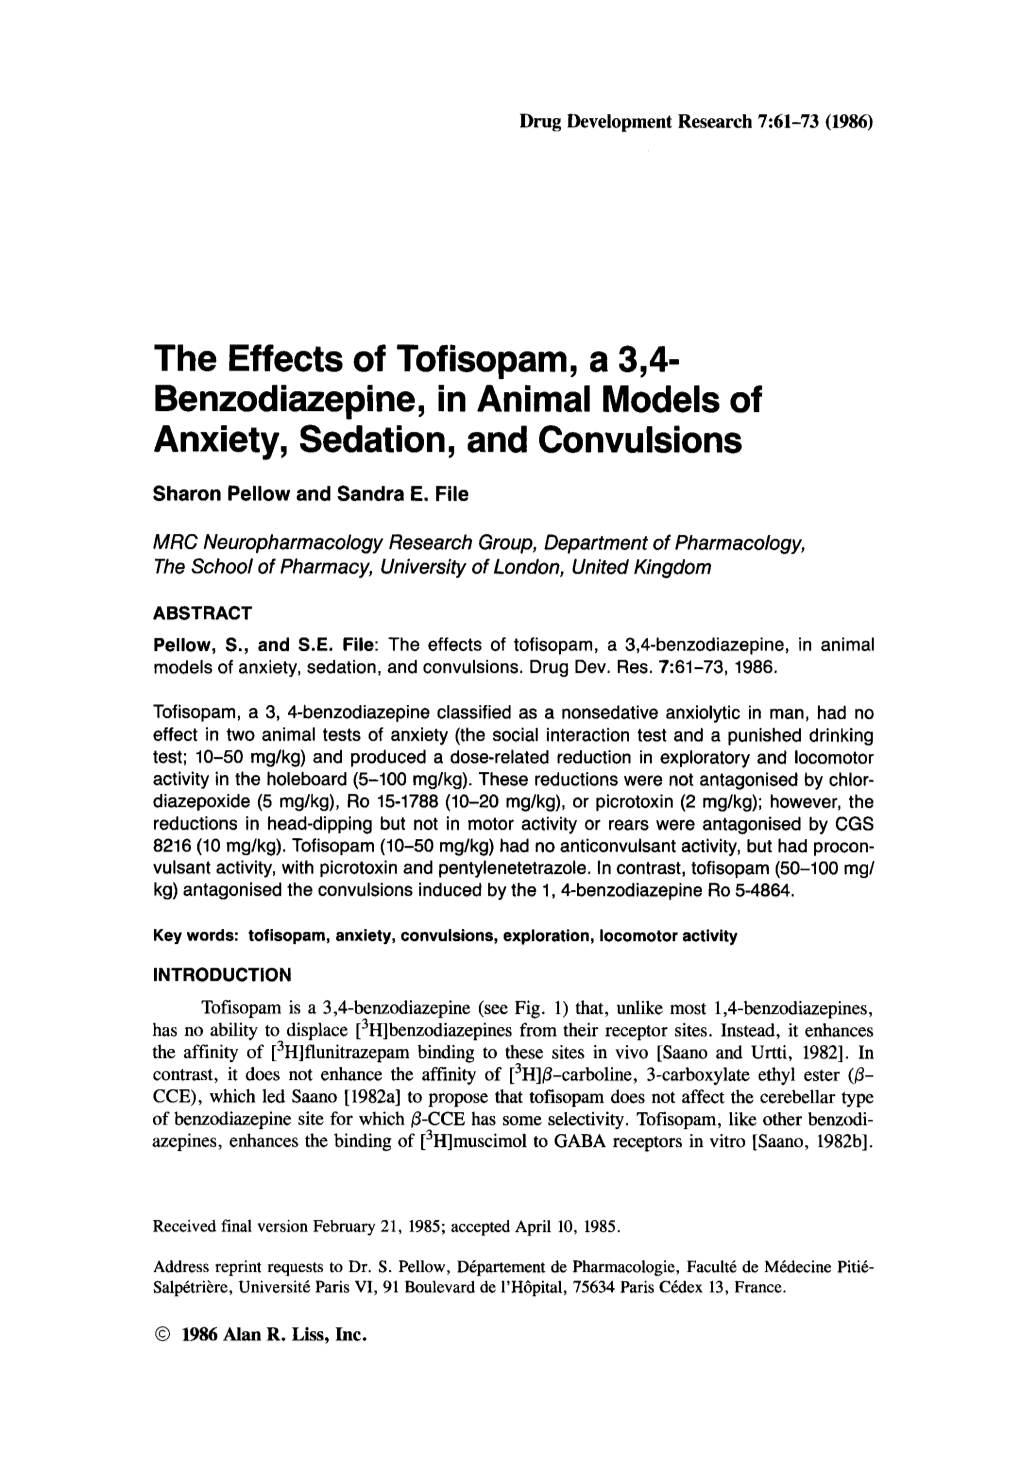 The Effects of Tofisopam, a 3,4-Benzodiazepine, in Animal Models of Anxiety, Sedation, and Convulsions